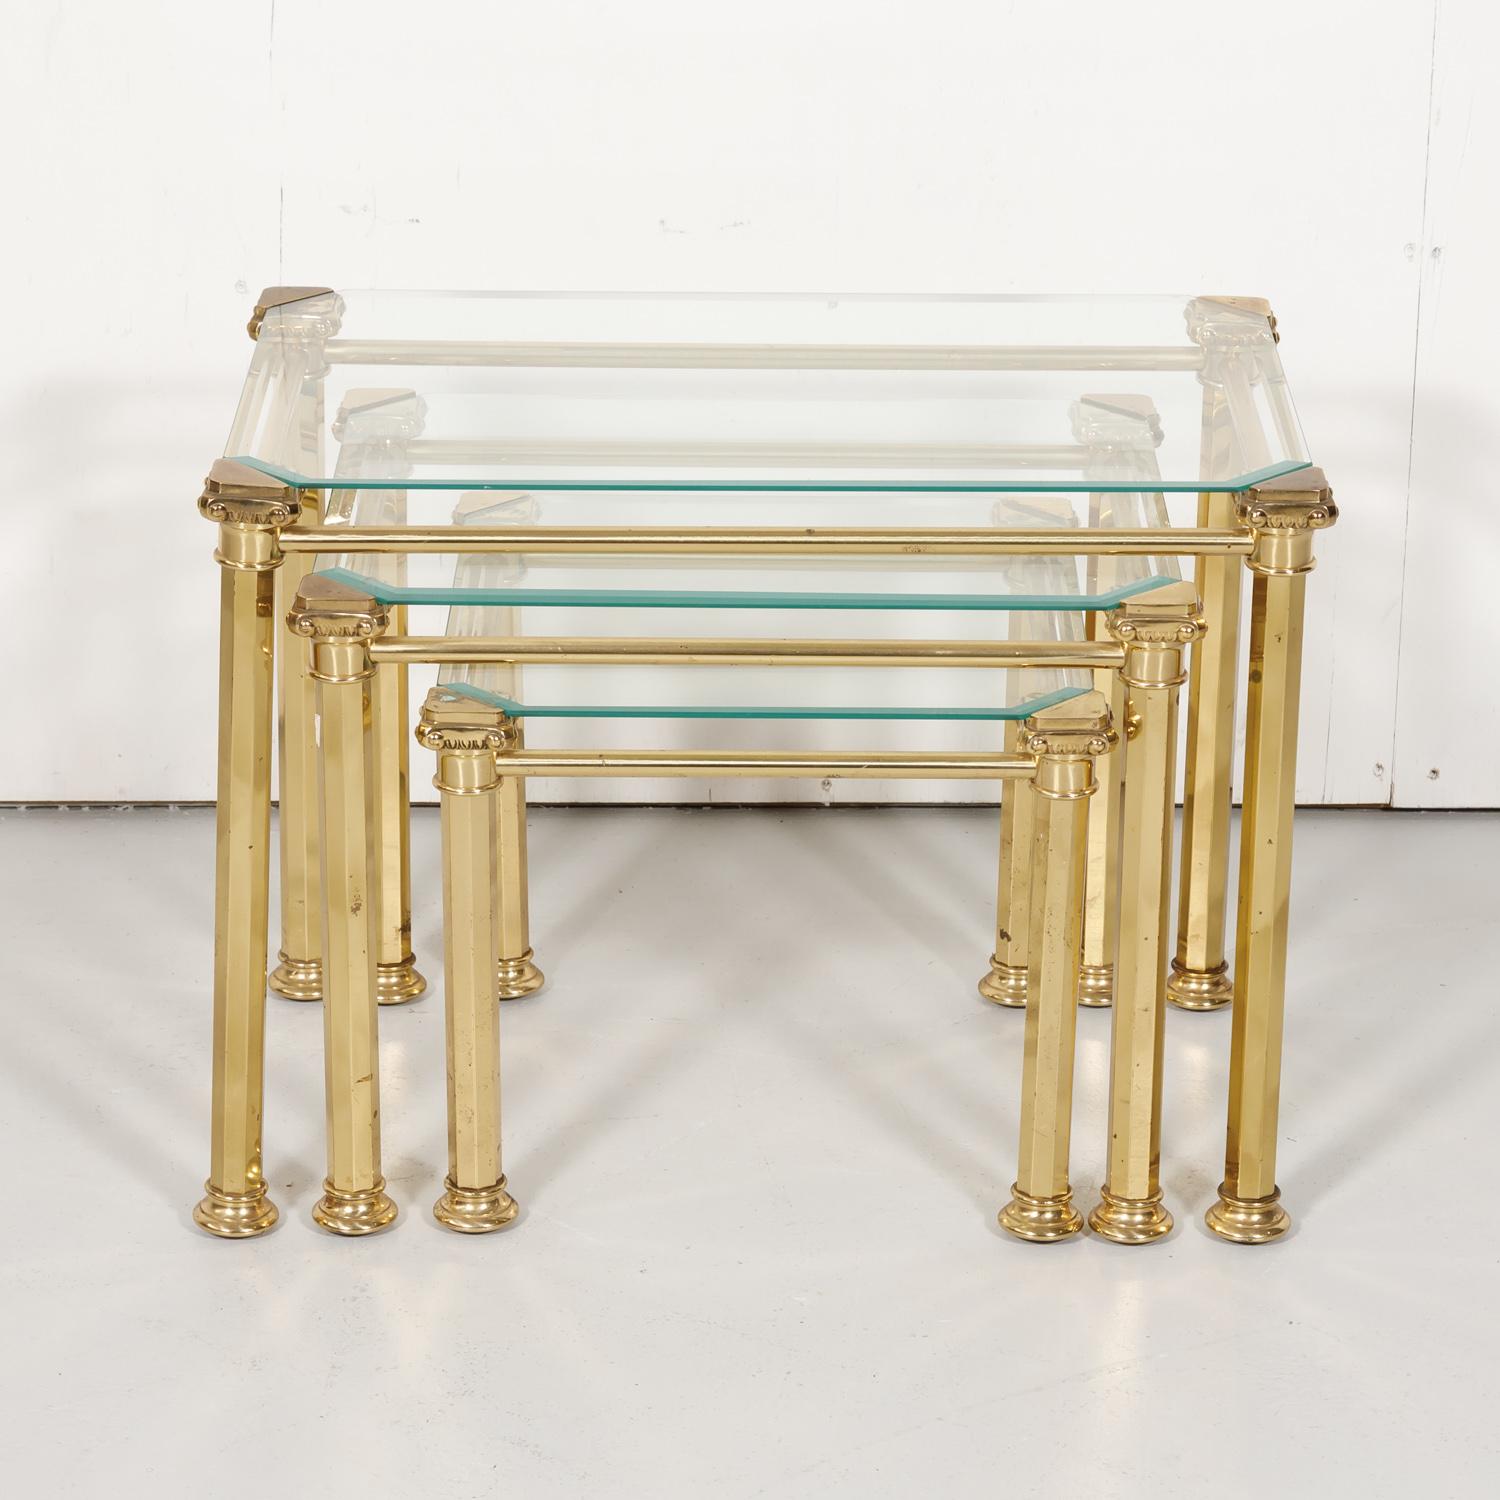 Mid-20th Century Set of Three French Mid-Century Modern Brass and Glass Nesting Tables by Maison